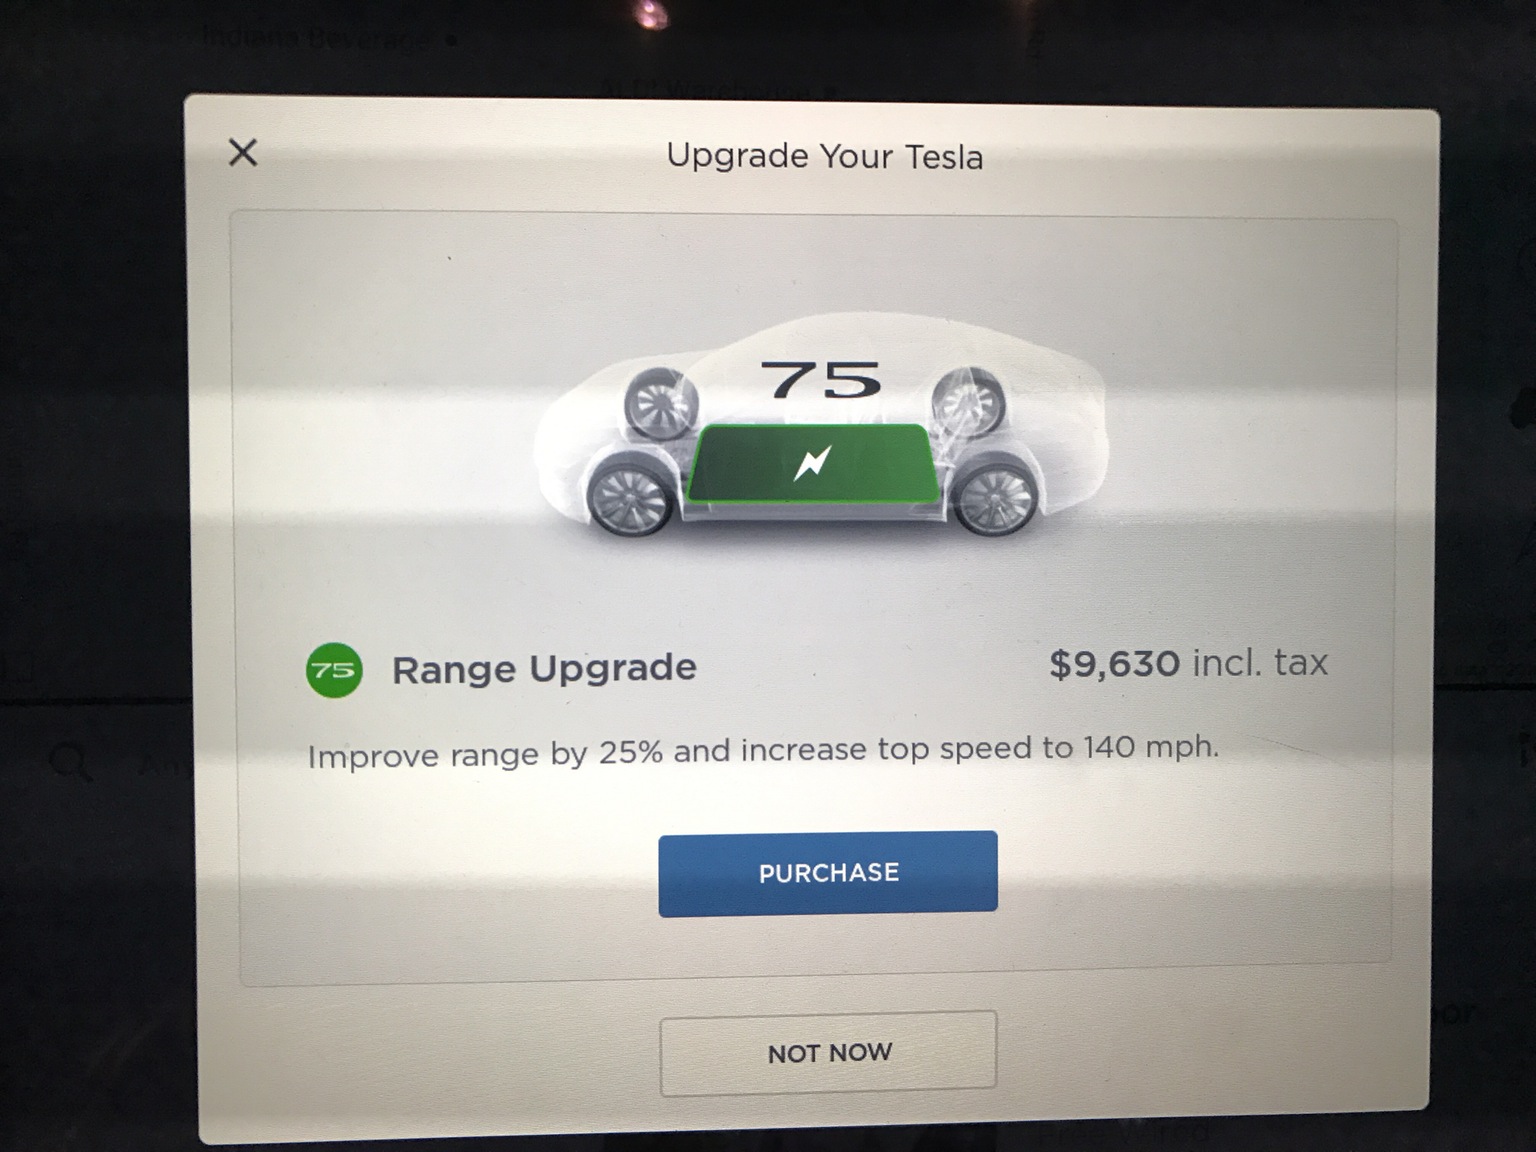 How to Avoid Being Locked Out of Your Tesla Model X - Tips for Ensuring Convenience and Comfort